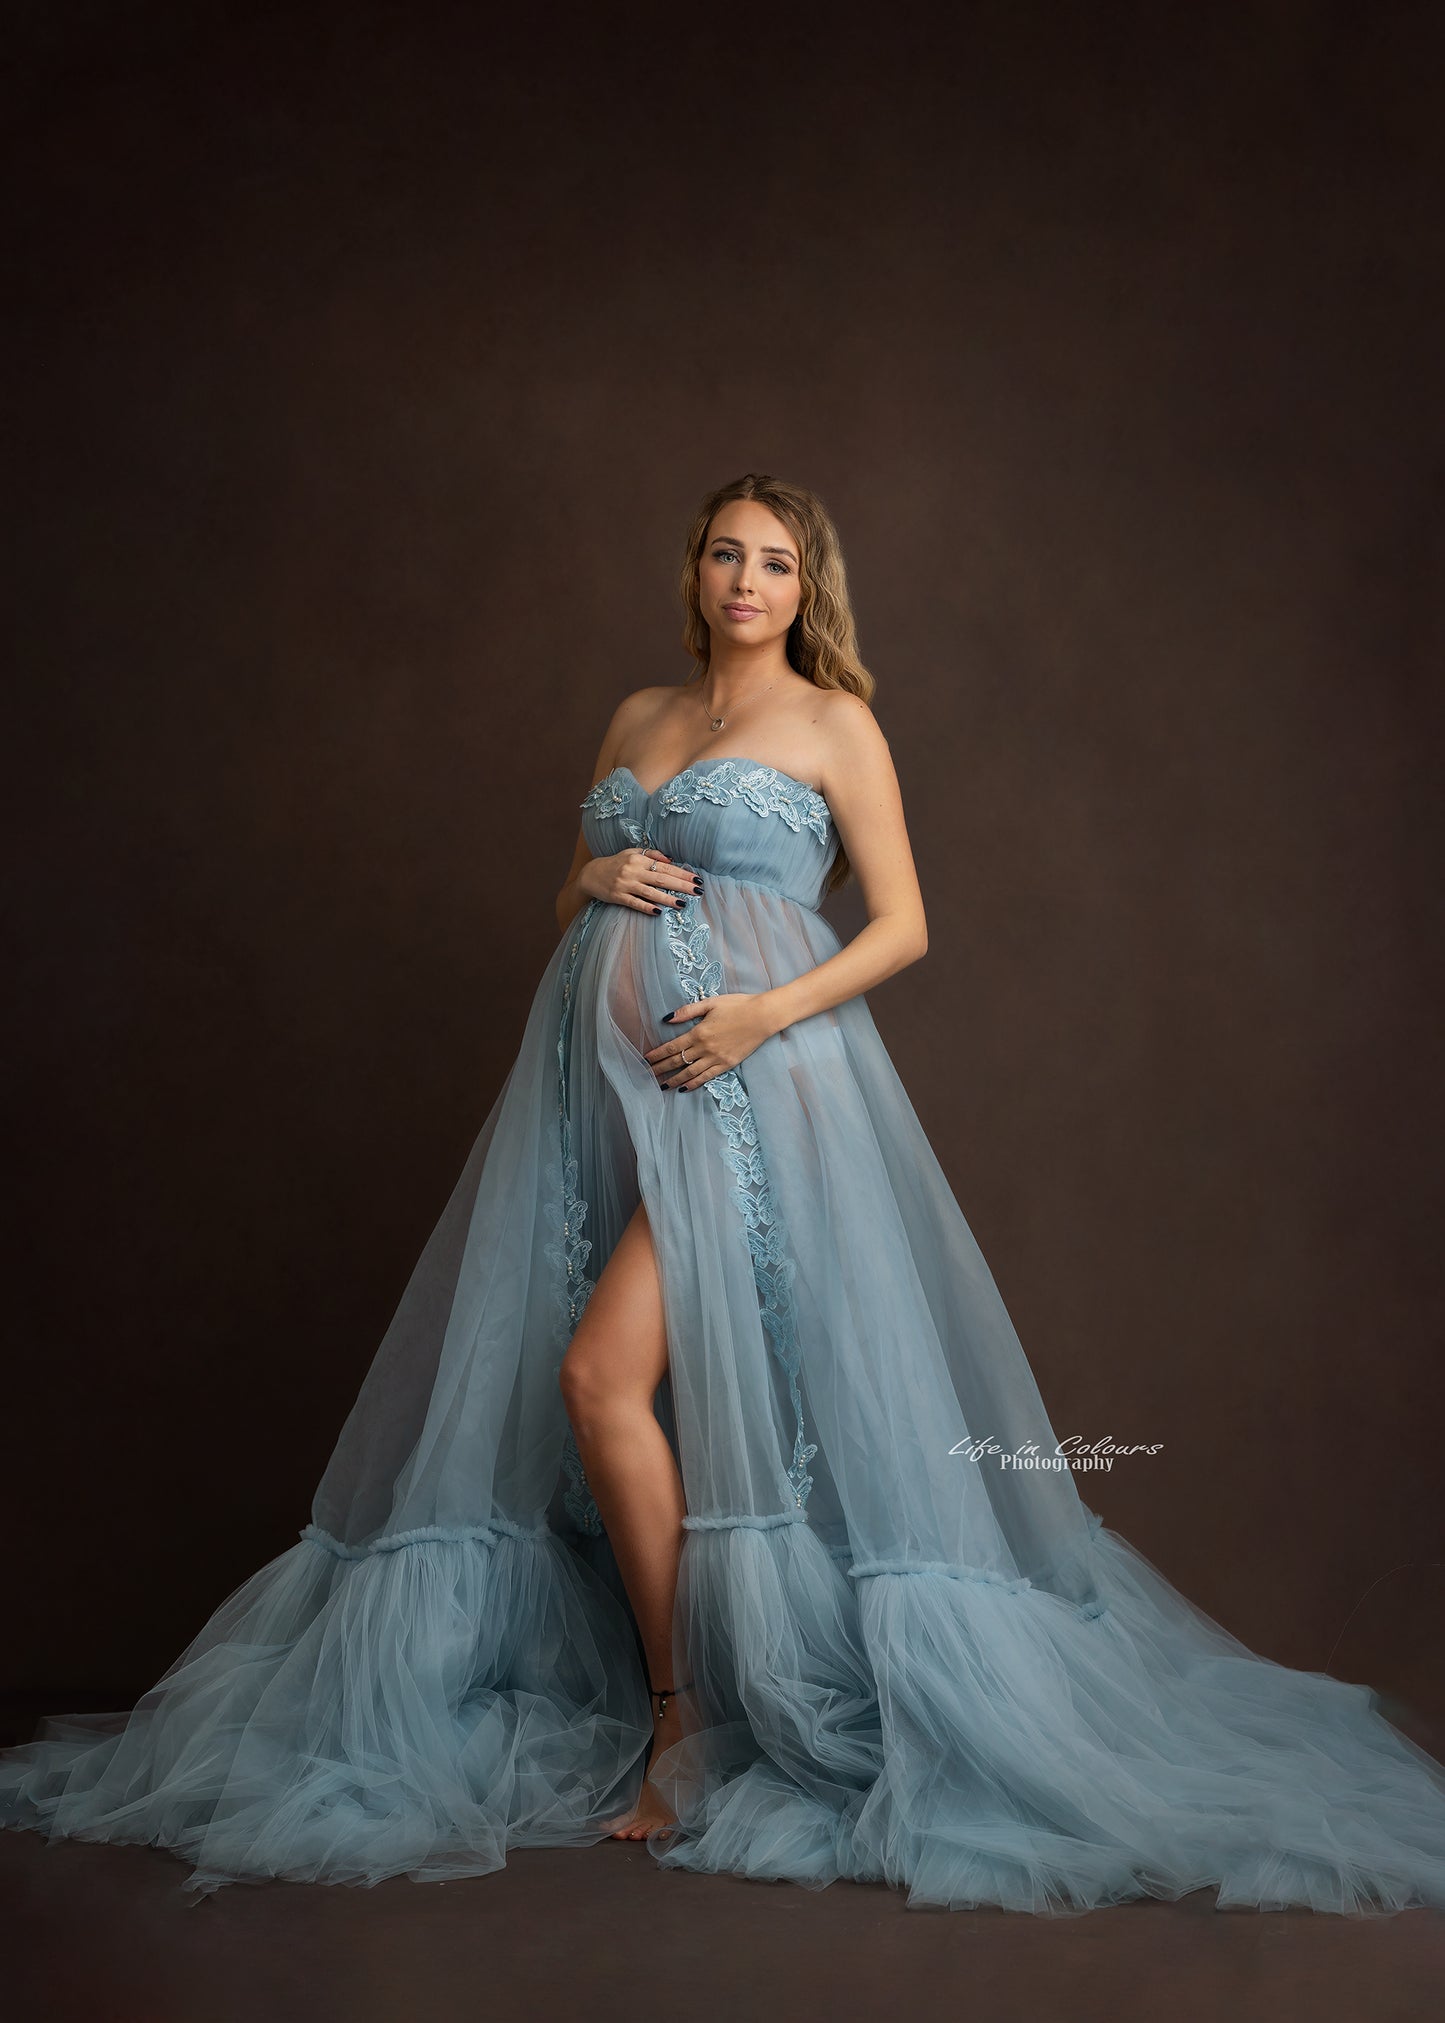 FOR HIRE / RENT tulle Blue Maternity Photoshoot Event Dress " Sky " with matching daughter dress